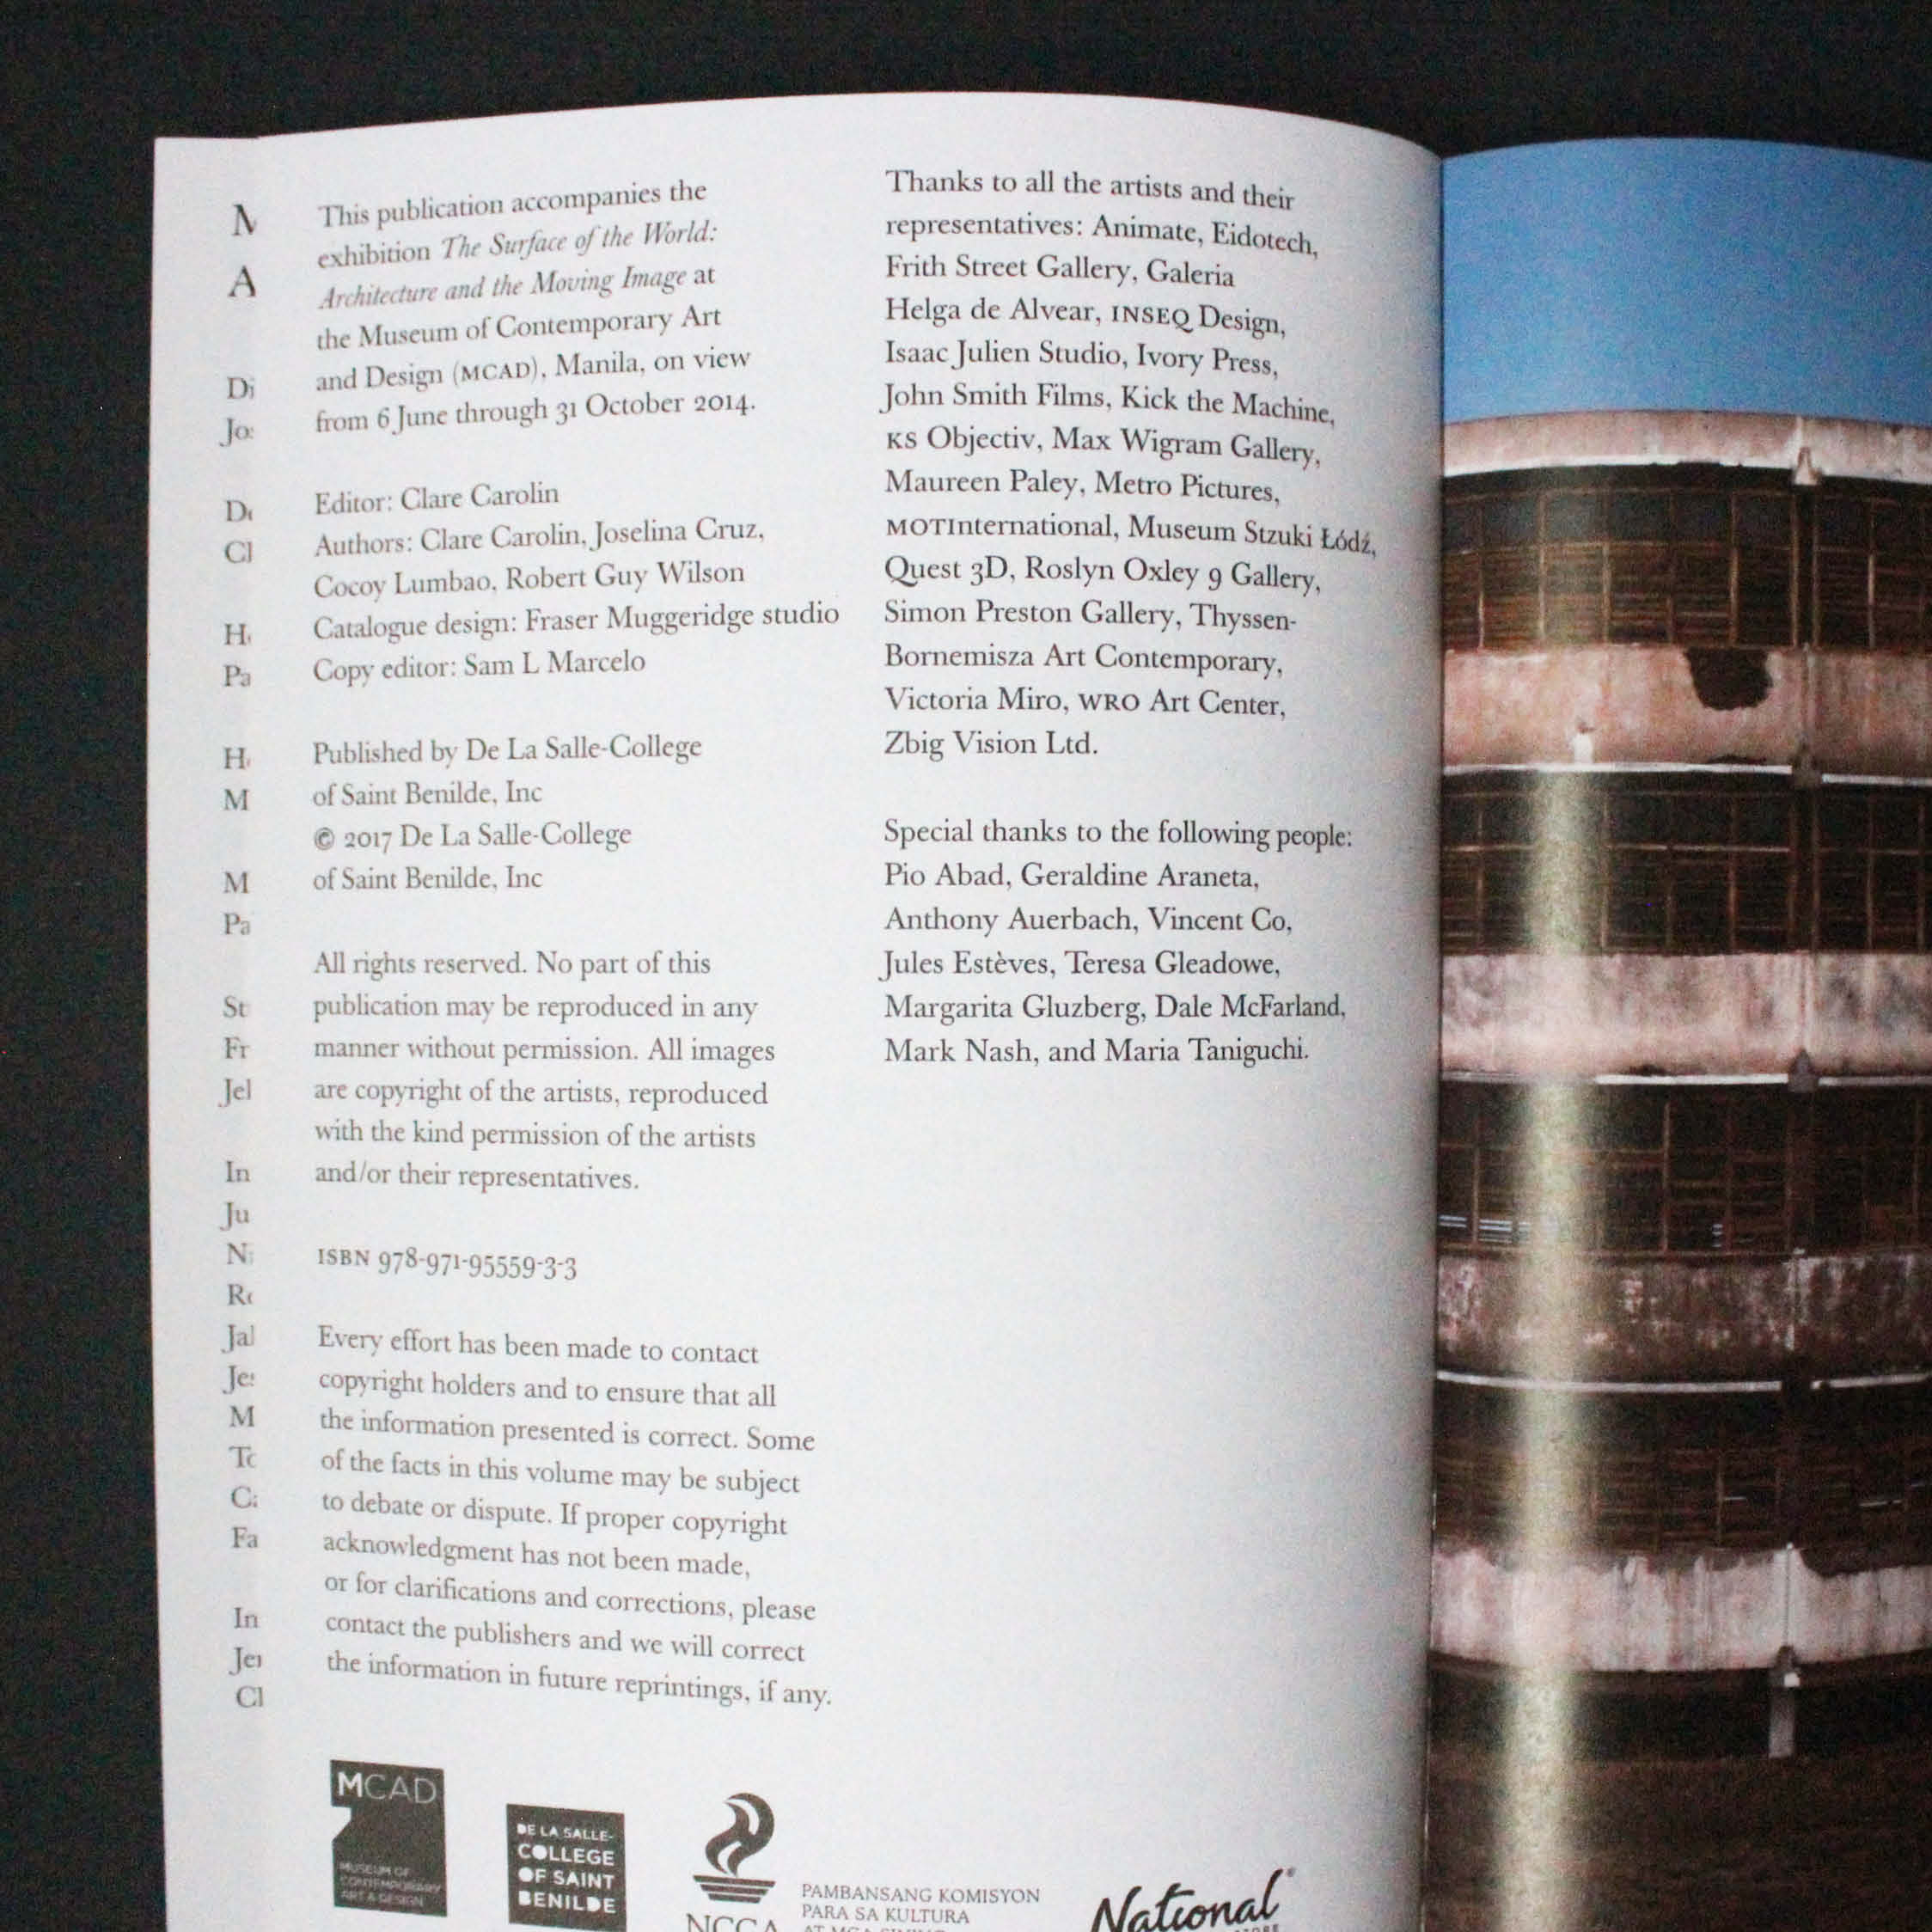 Clare Carolin, The Surface of the World exhibition catalogue for MCAD Manila